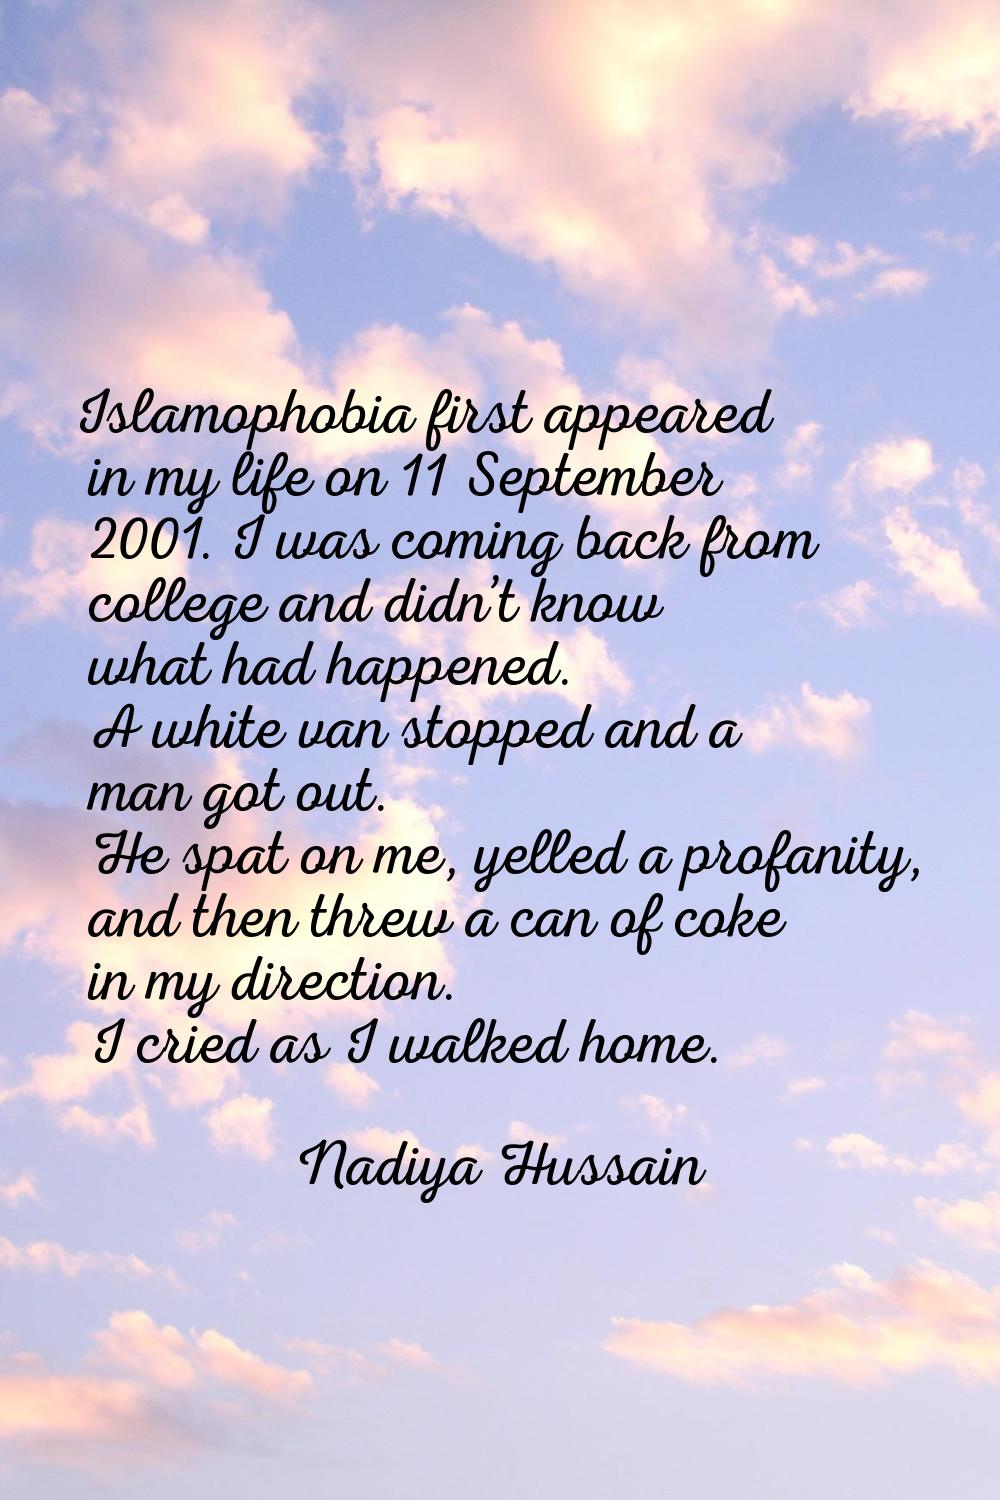 Islamophobia first appeared in my life on 11 September 2001. I was coming back from college and did